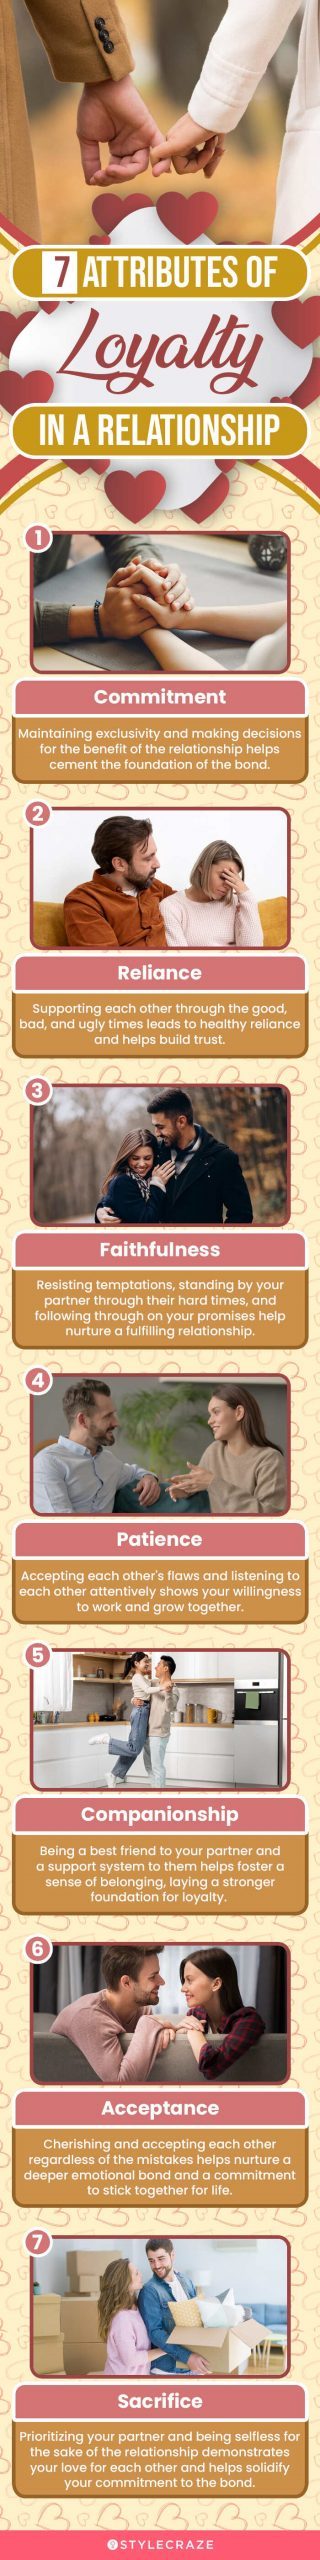 7 attributes of loyalty in a relationship (infographic)